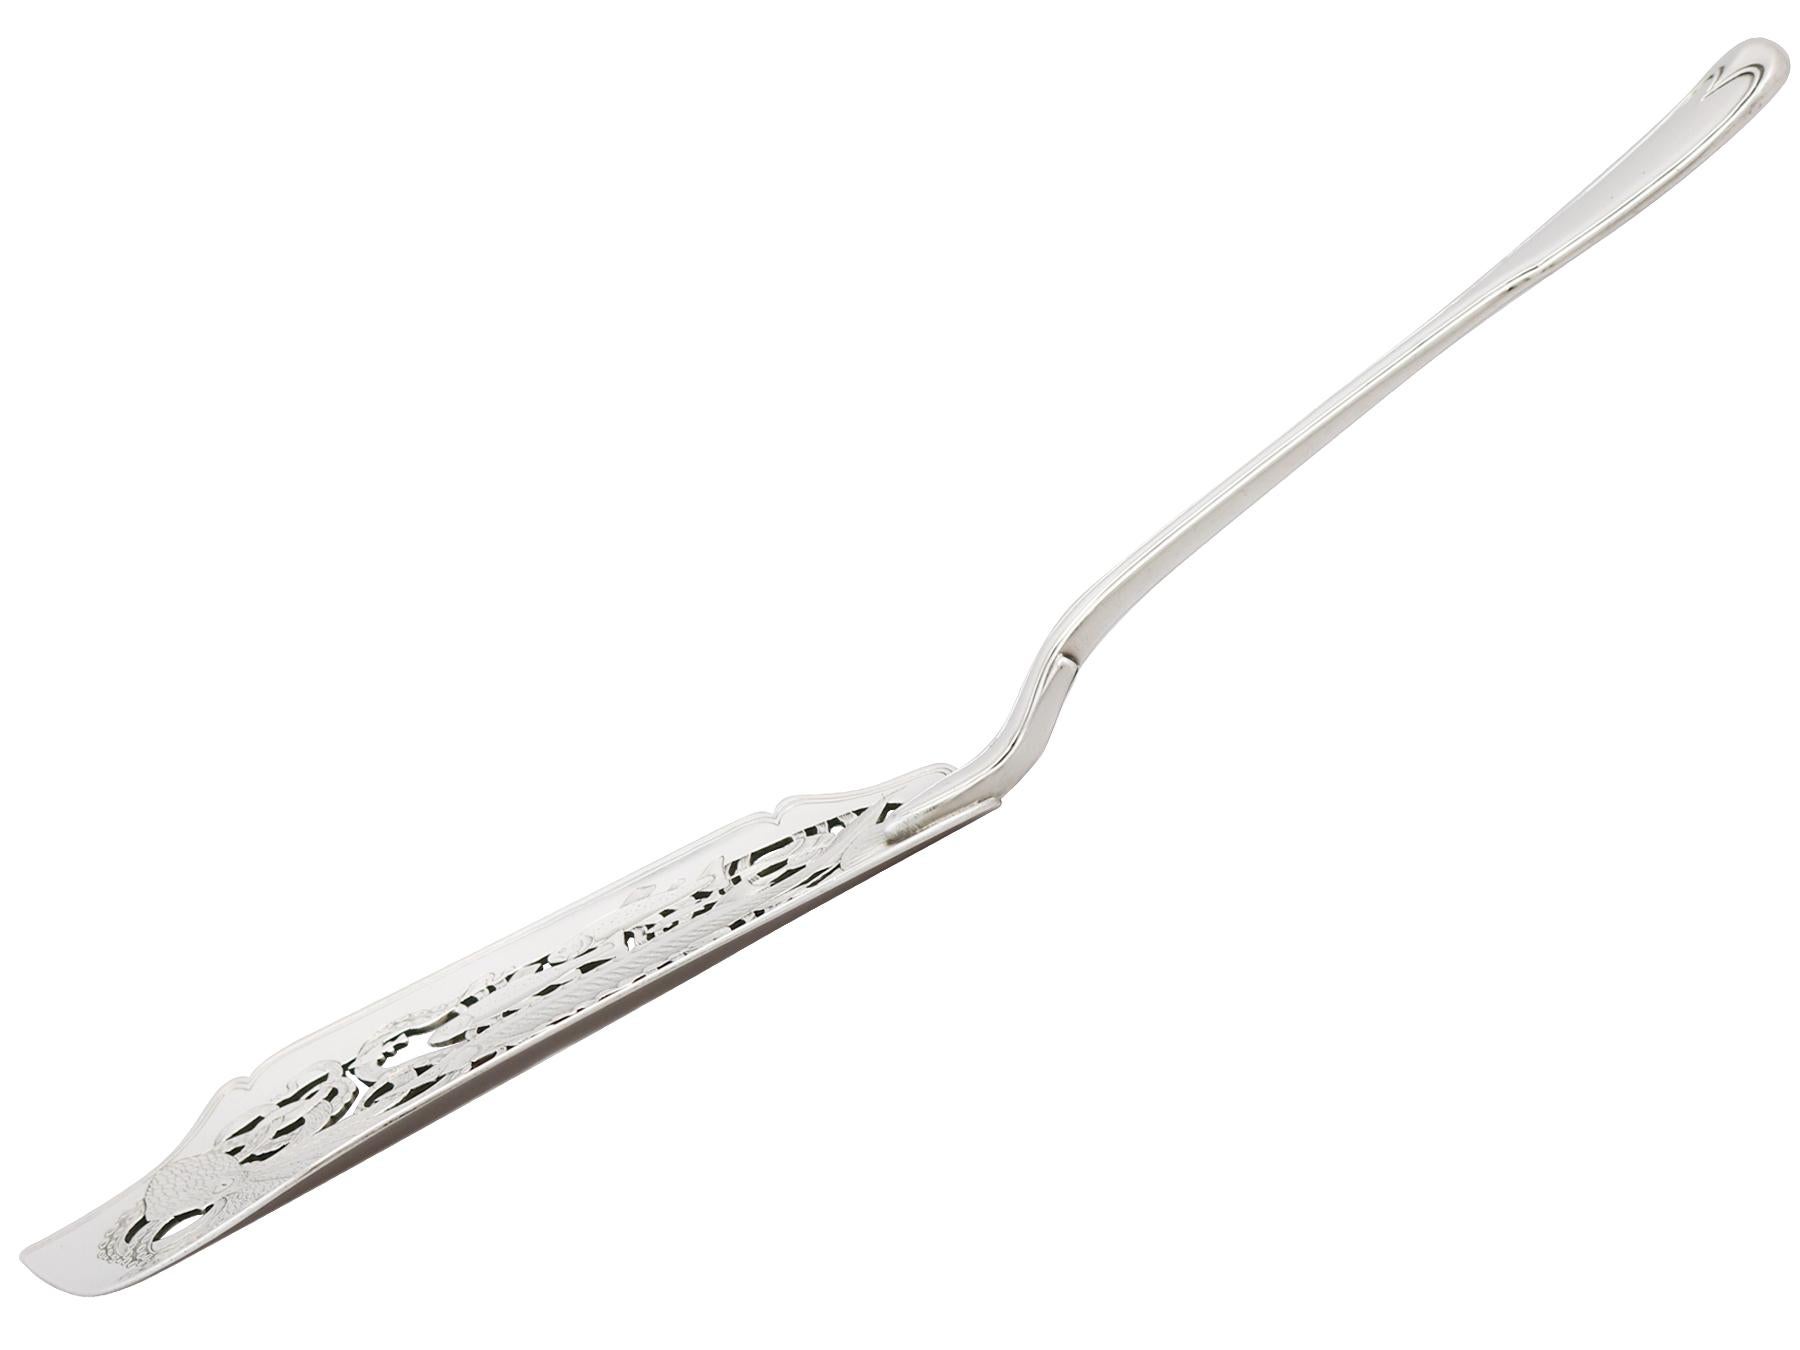 An exceptional, fine and impressive, rare antique Georgian English sterling silver fish slice / server made by Paul Storr, an addition to our silver flatware collection.

This magnificent antique George III sterling silver fish slice by Paul